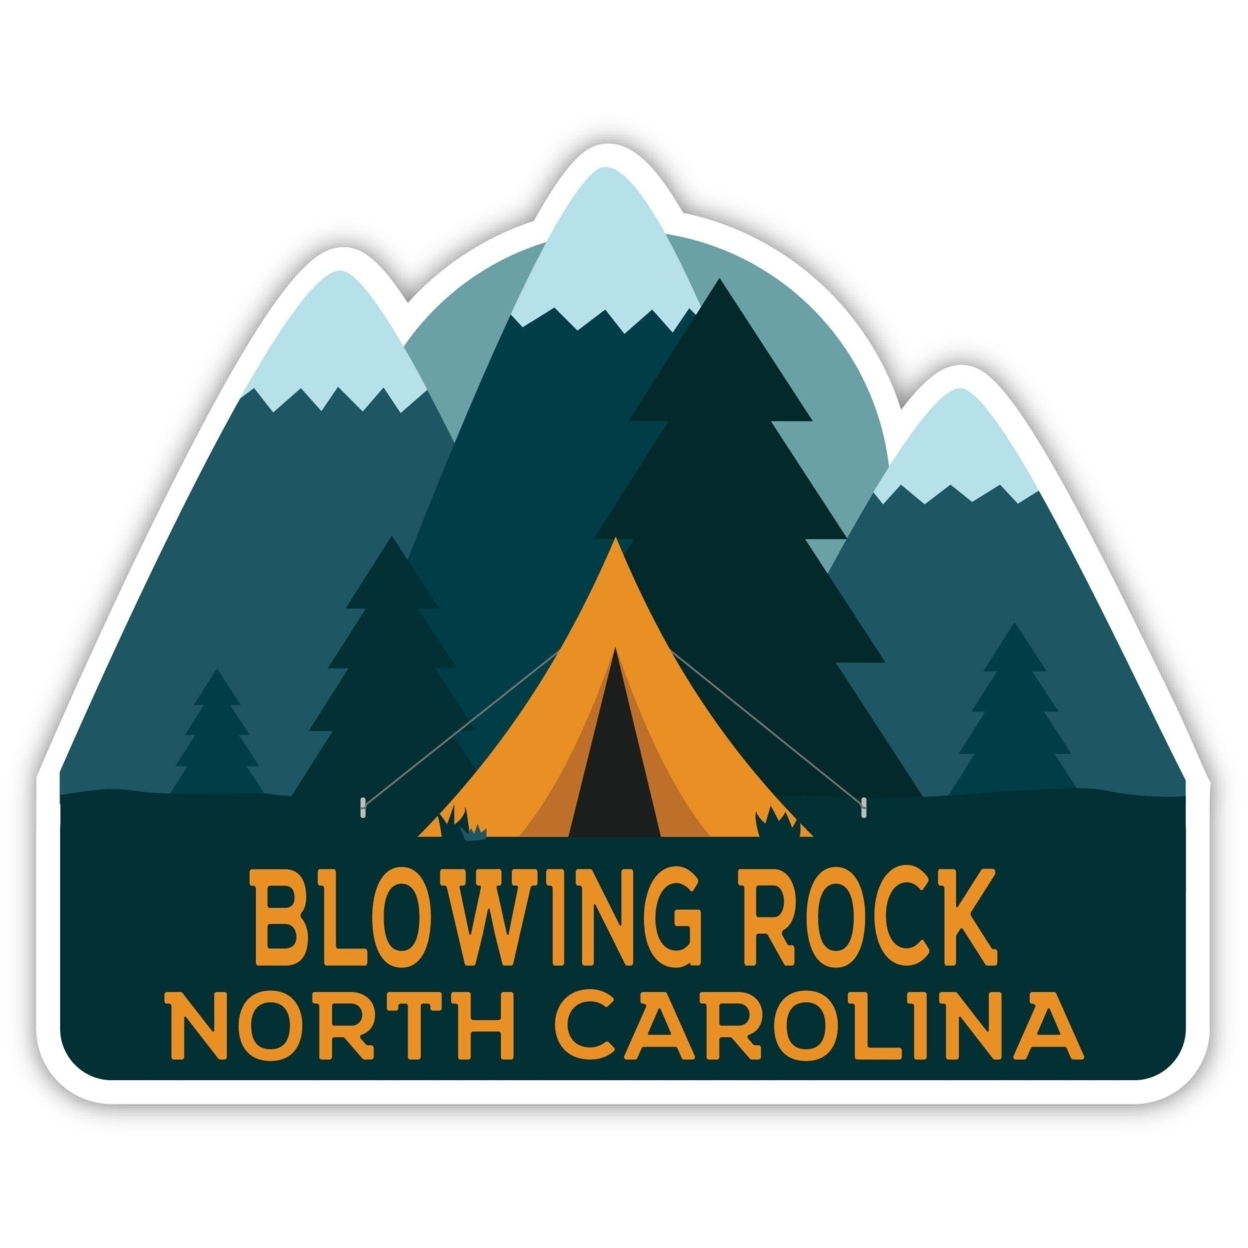 Blowing Rock North Carolina Souvenir Decorative Stickers (Choose Theme And Size) - 4-Pack, 2-Inch, Adventures Awaits